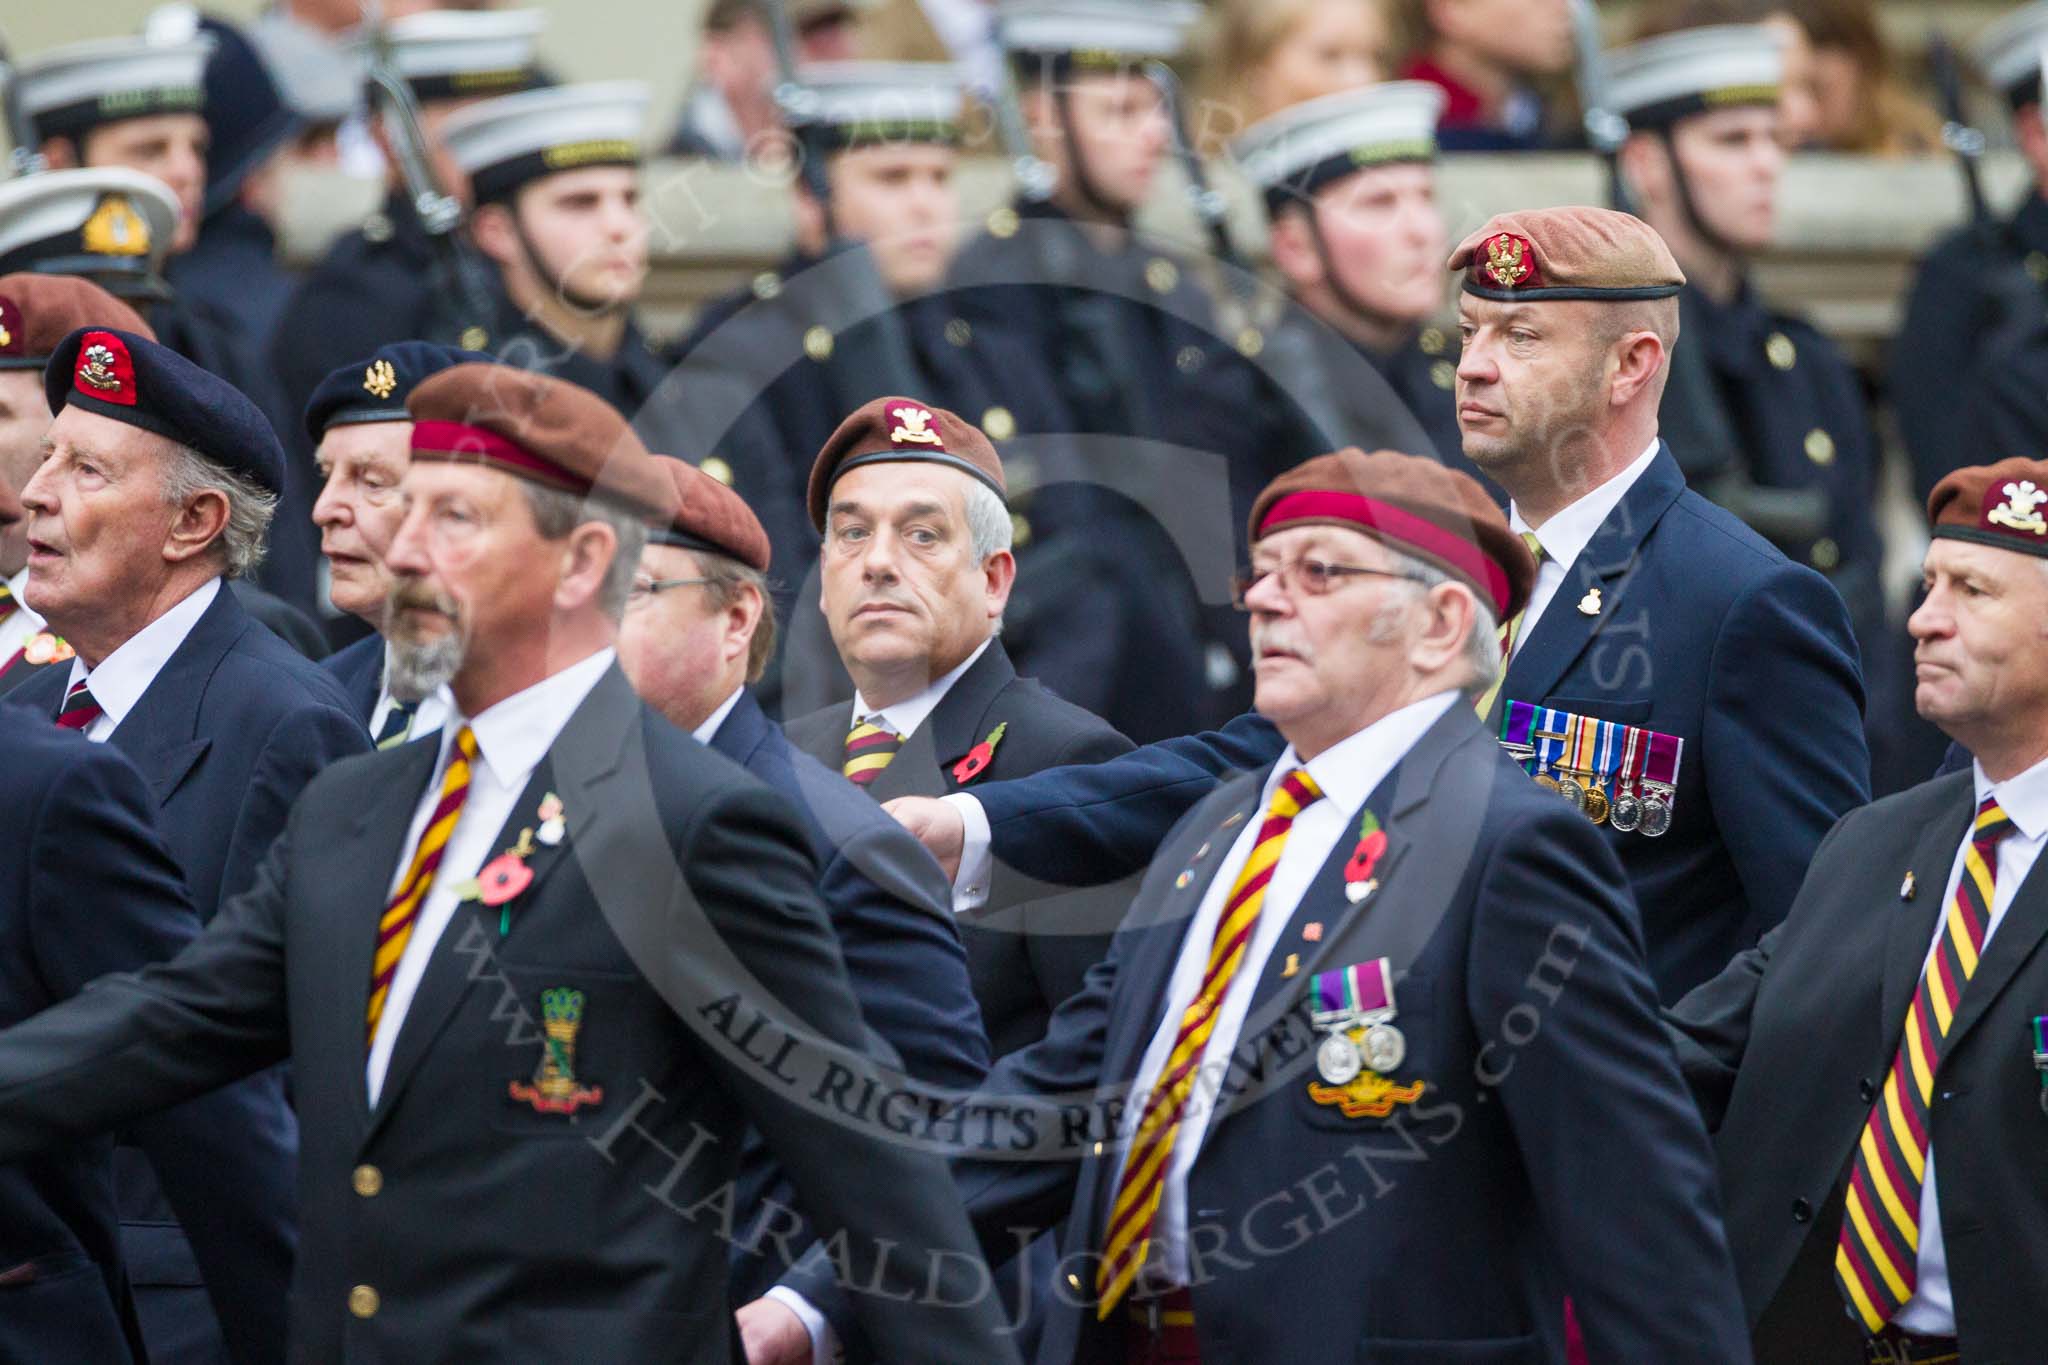 Remembrance Sunday at the Cenotaph 2015: Group B25, Kings Royal Hussars Regimental Association.
Cenotaph, Whitehall, London SW1,
London,
Greater London,
United Kingdom,
on 08 November 2015 at 11:41, image #203